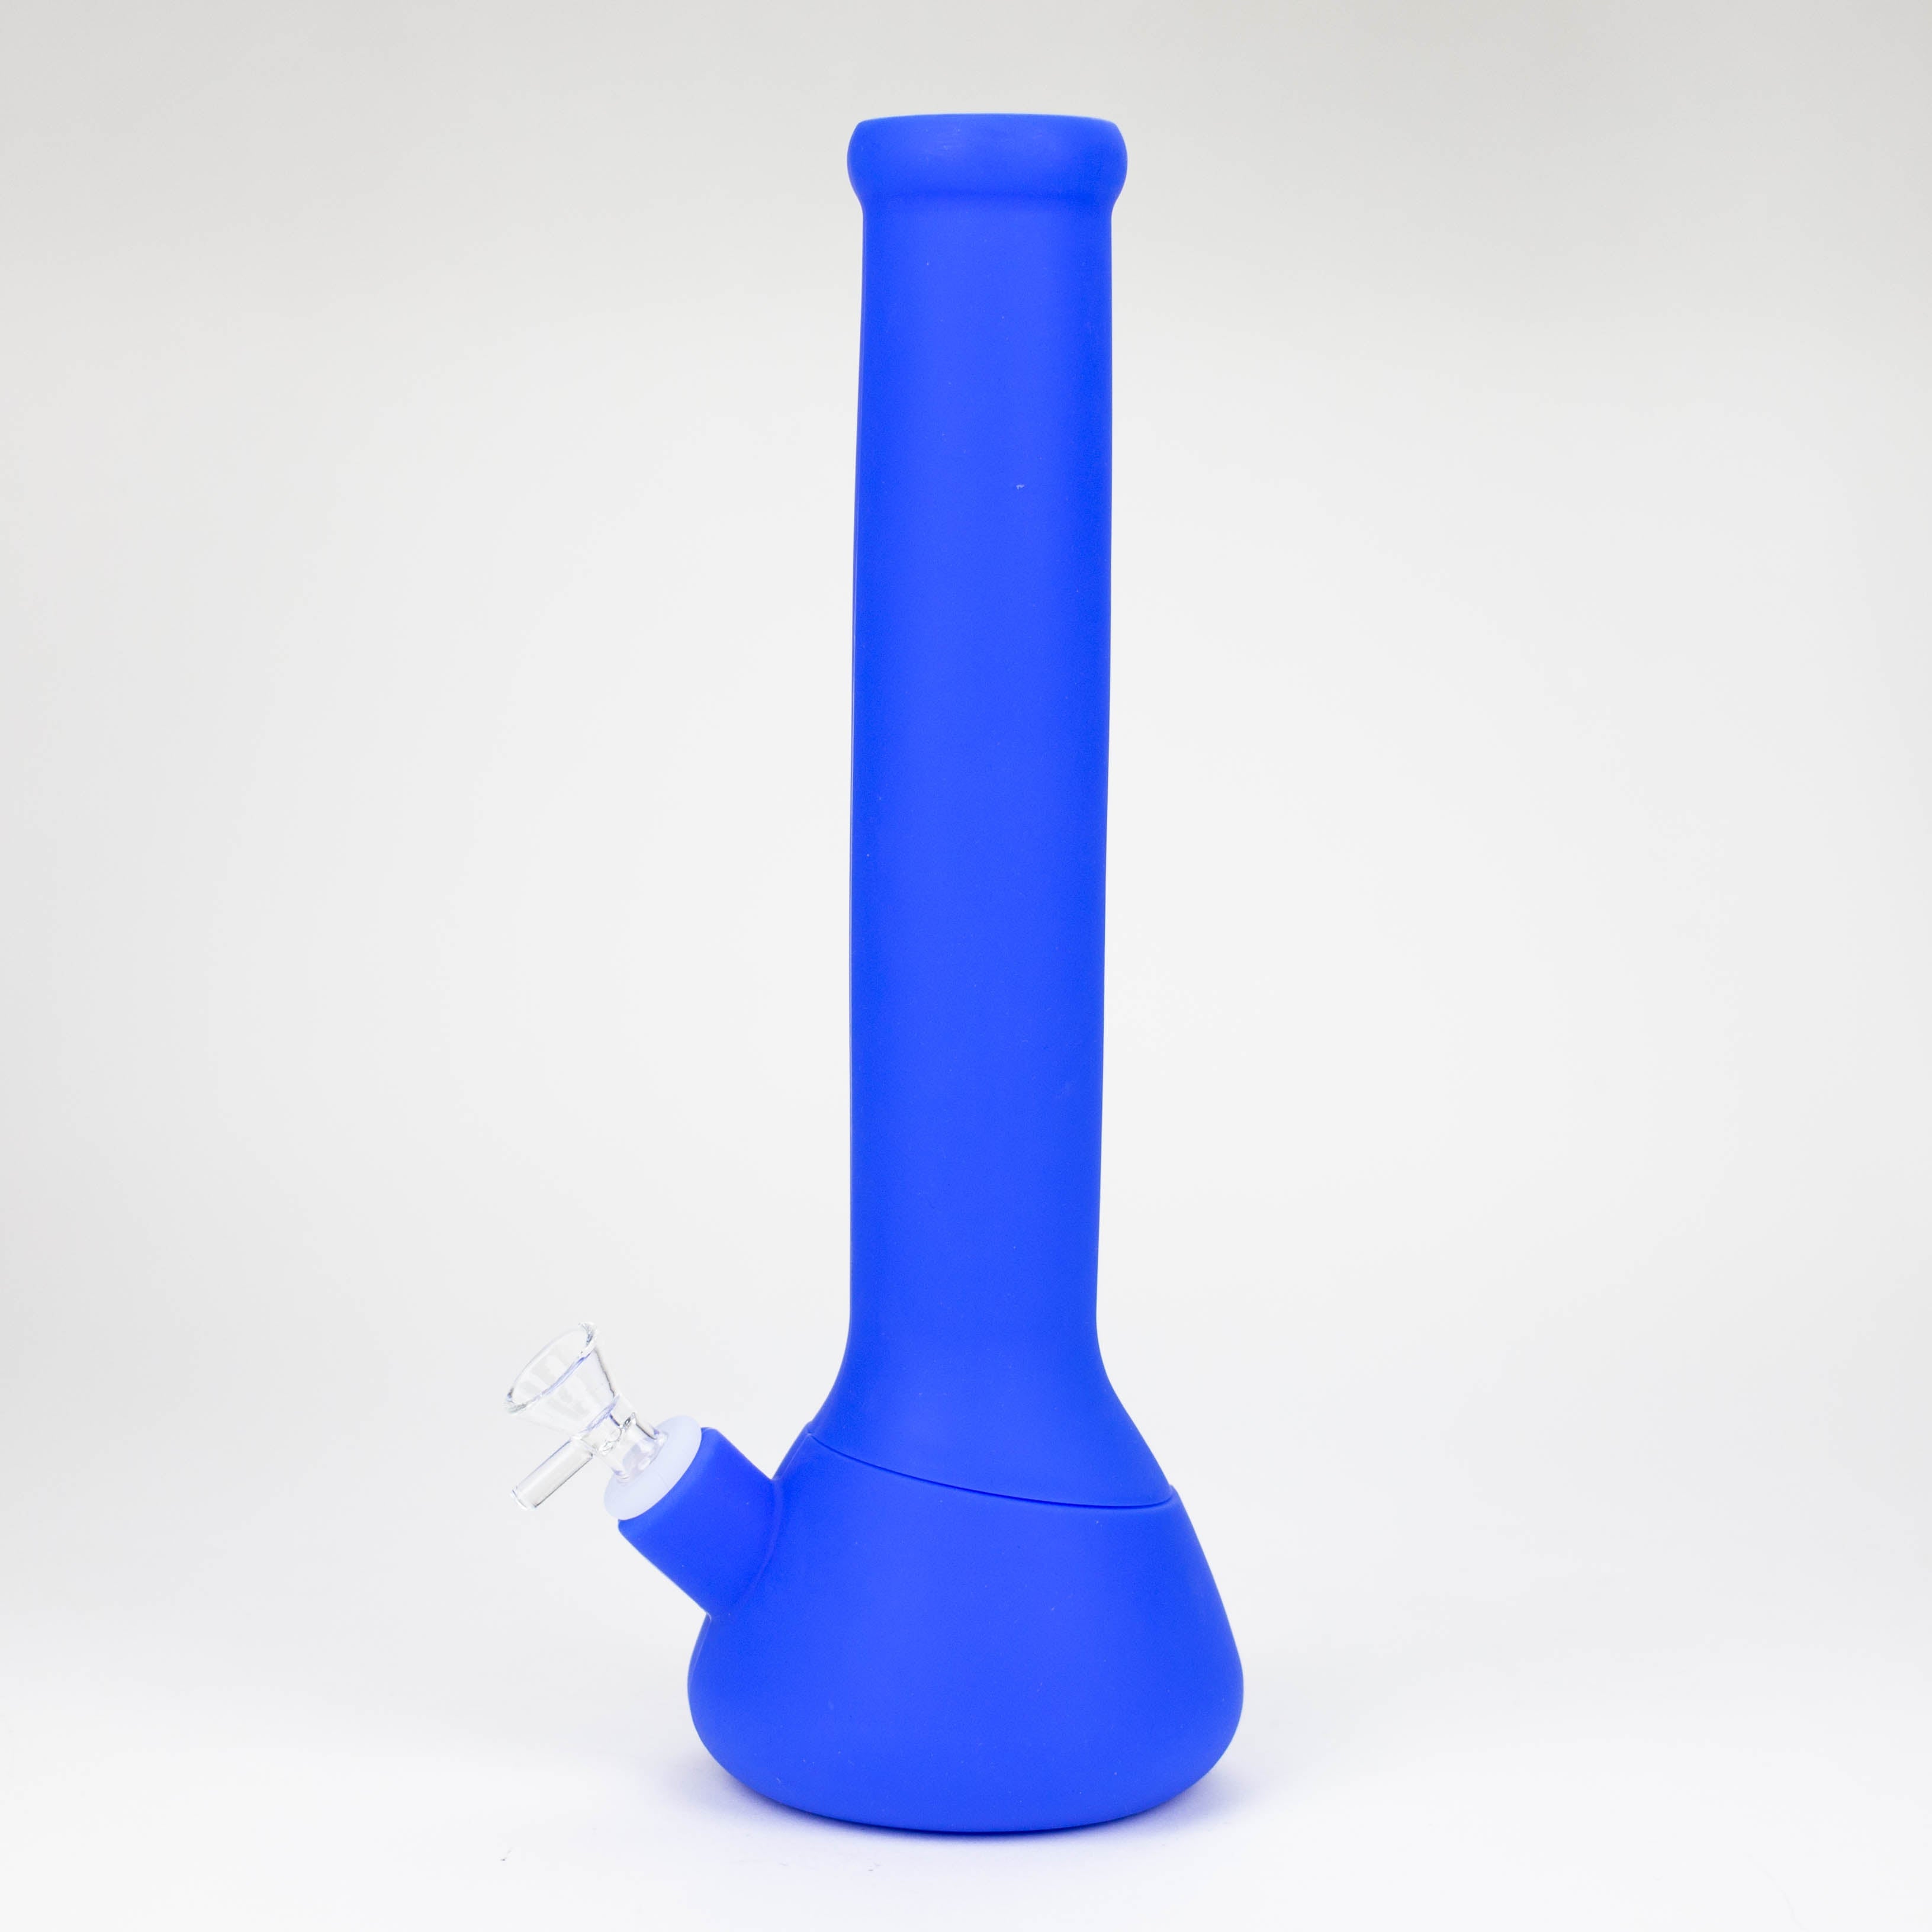 13.5" detachable silicone water bong - Assorted [H5]_2